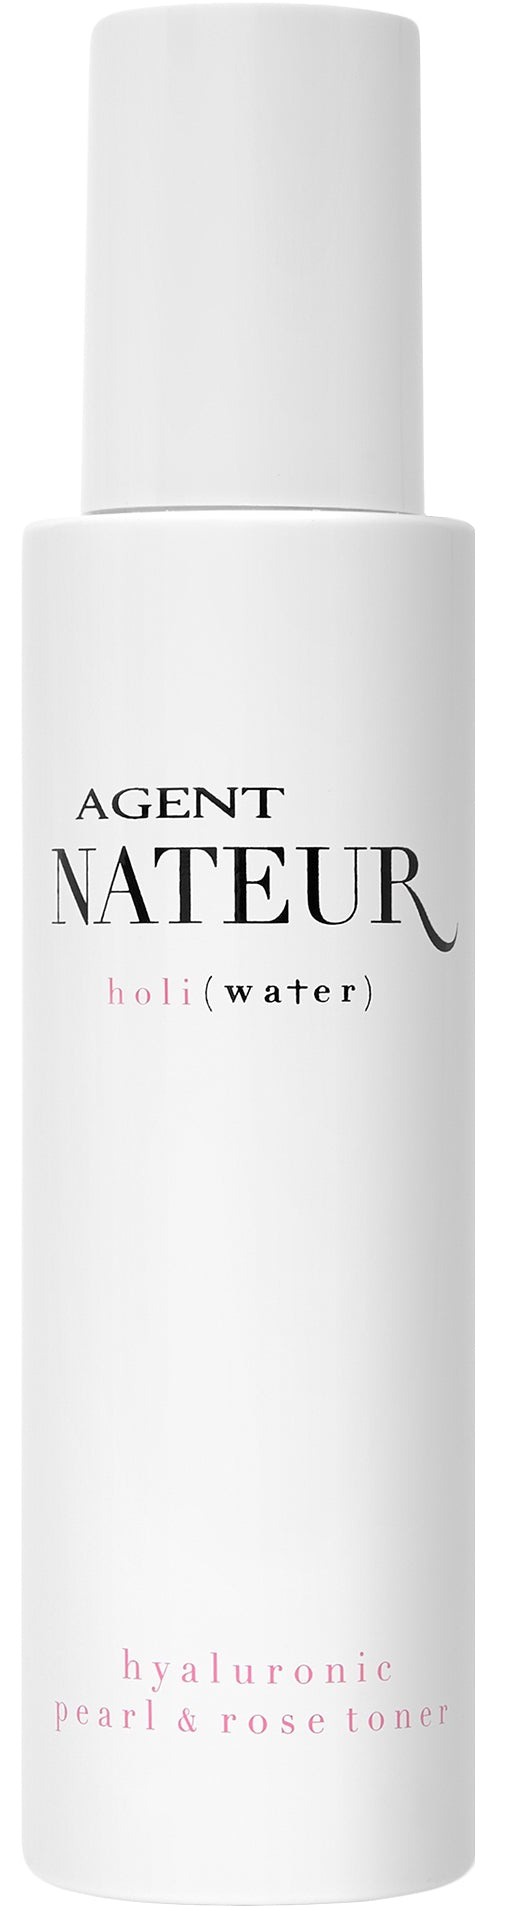 Agent Nateur Holi (water)